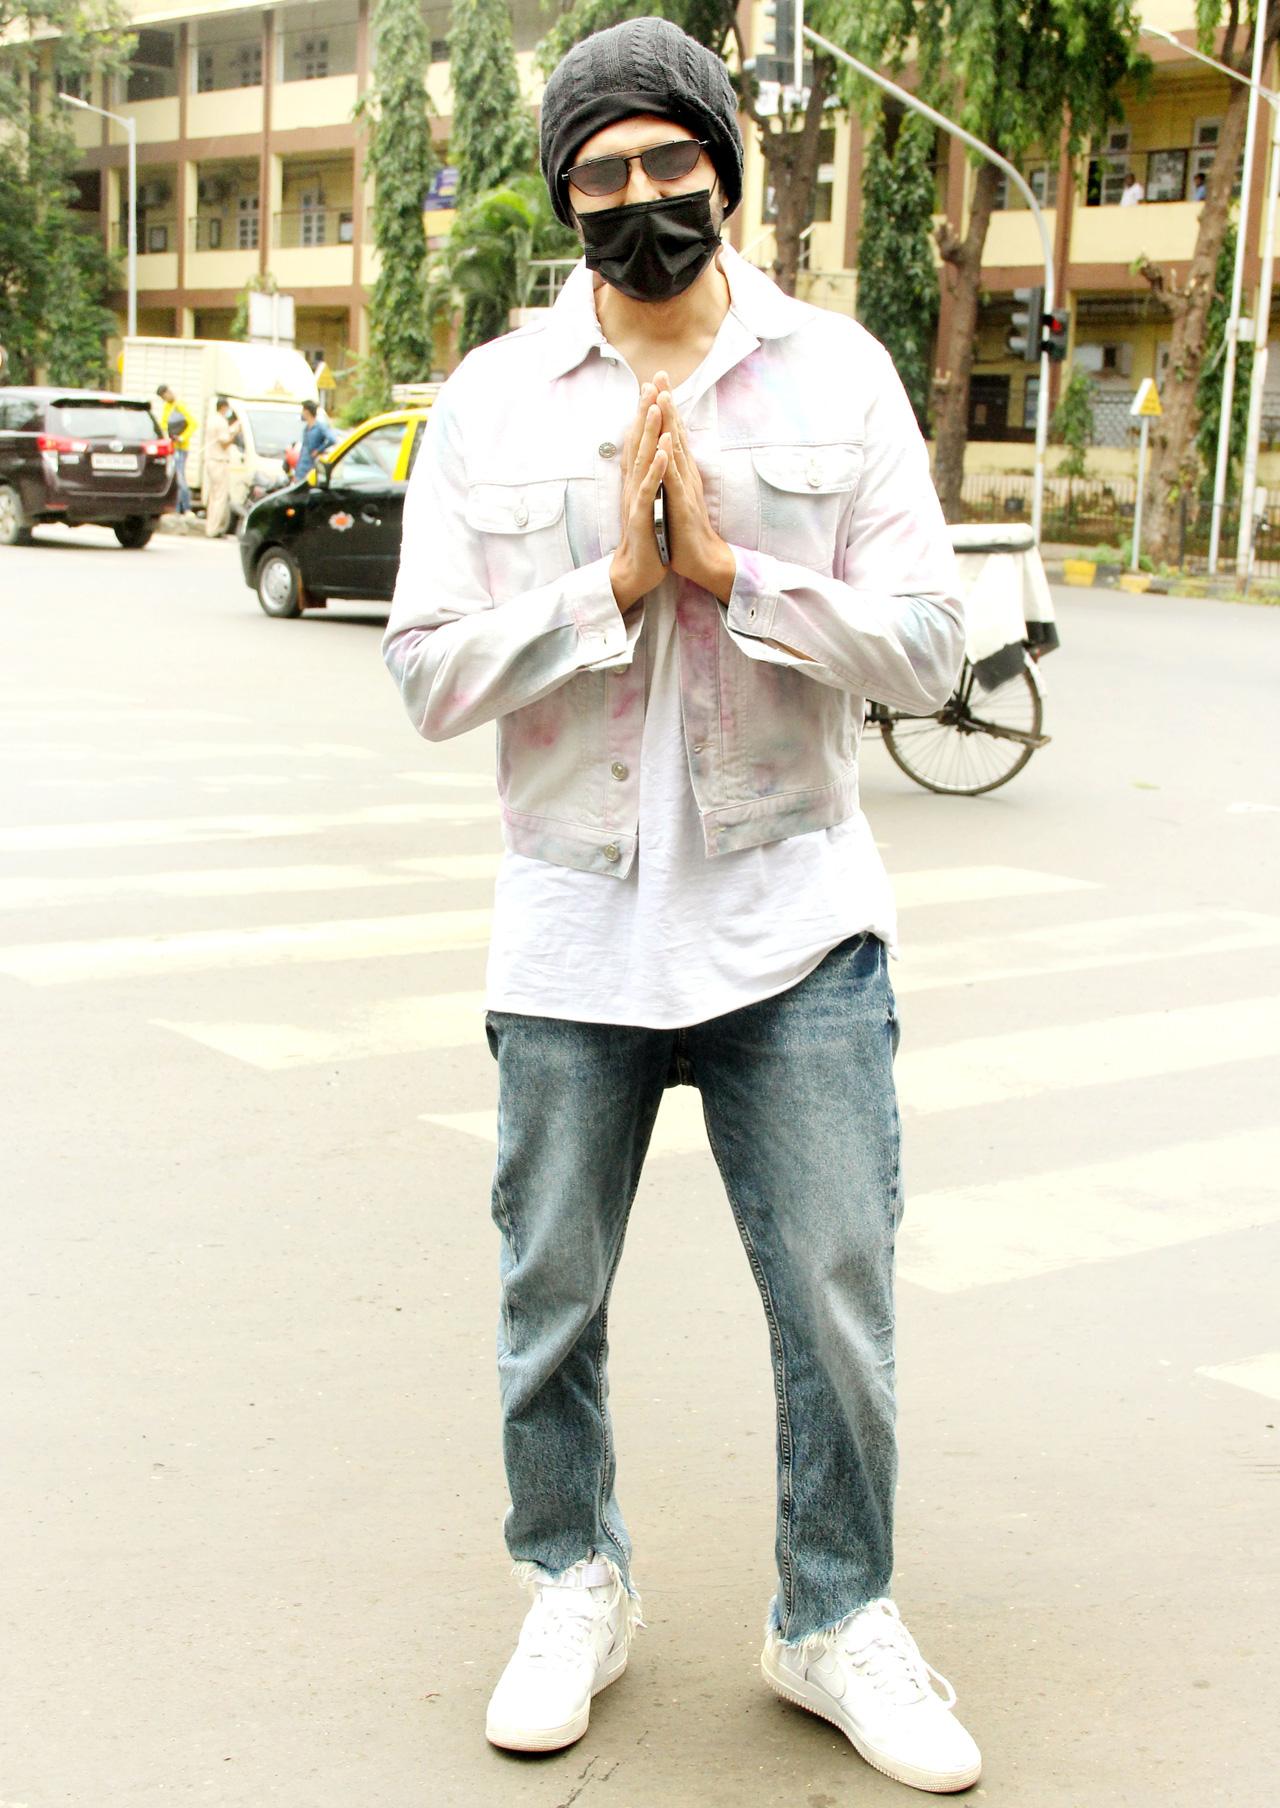 Kartik Aaryan happily posed for the photographers as he was clicked outside a popular restaurant in Bandra.